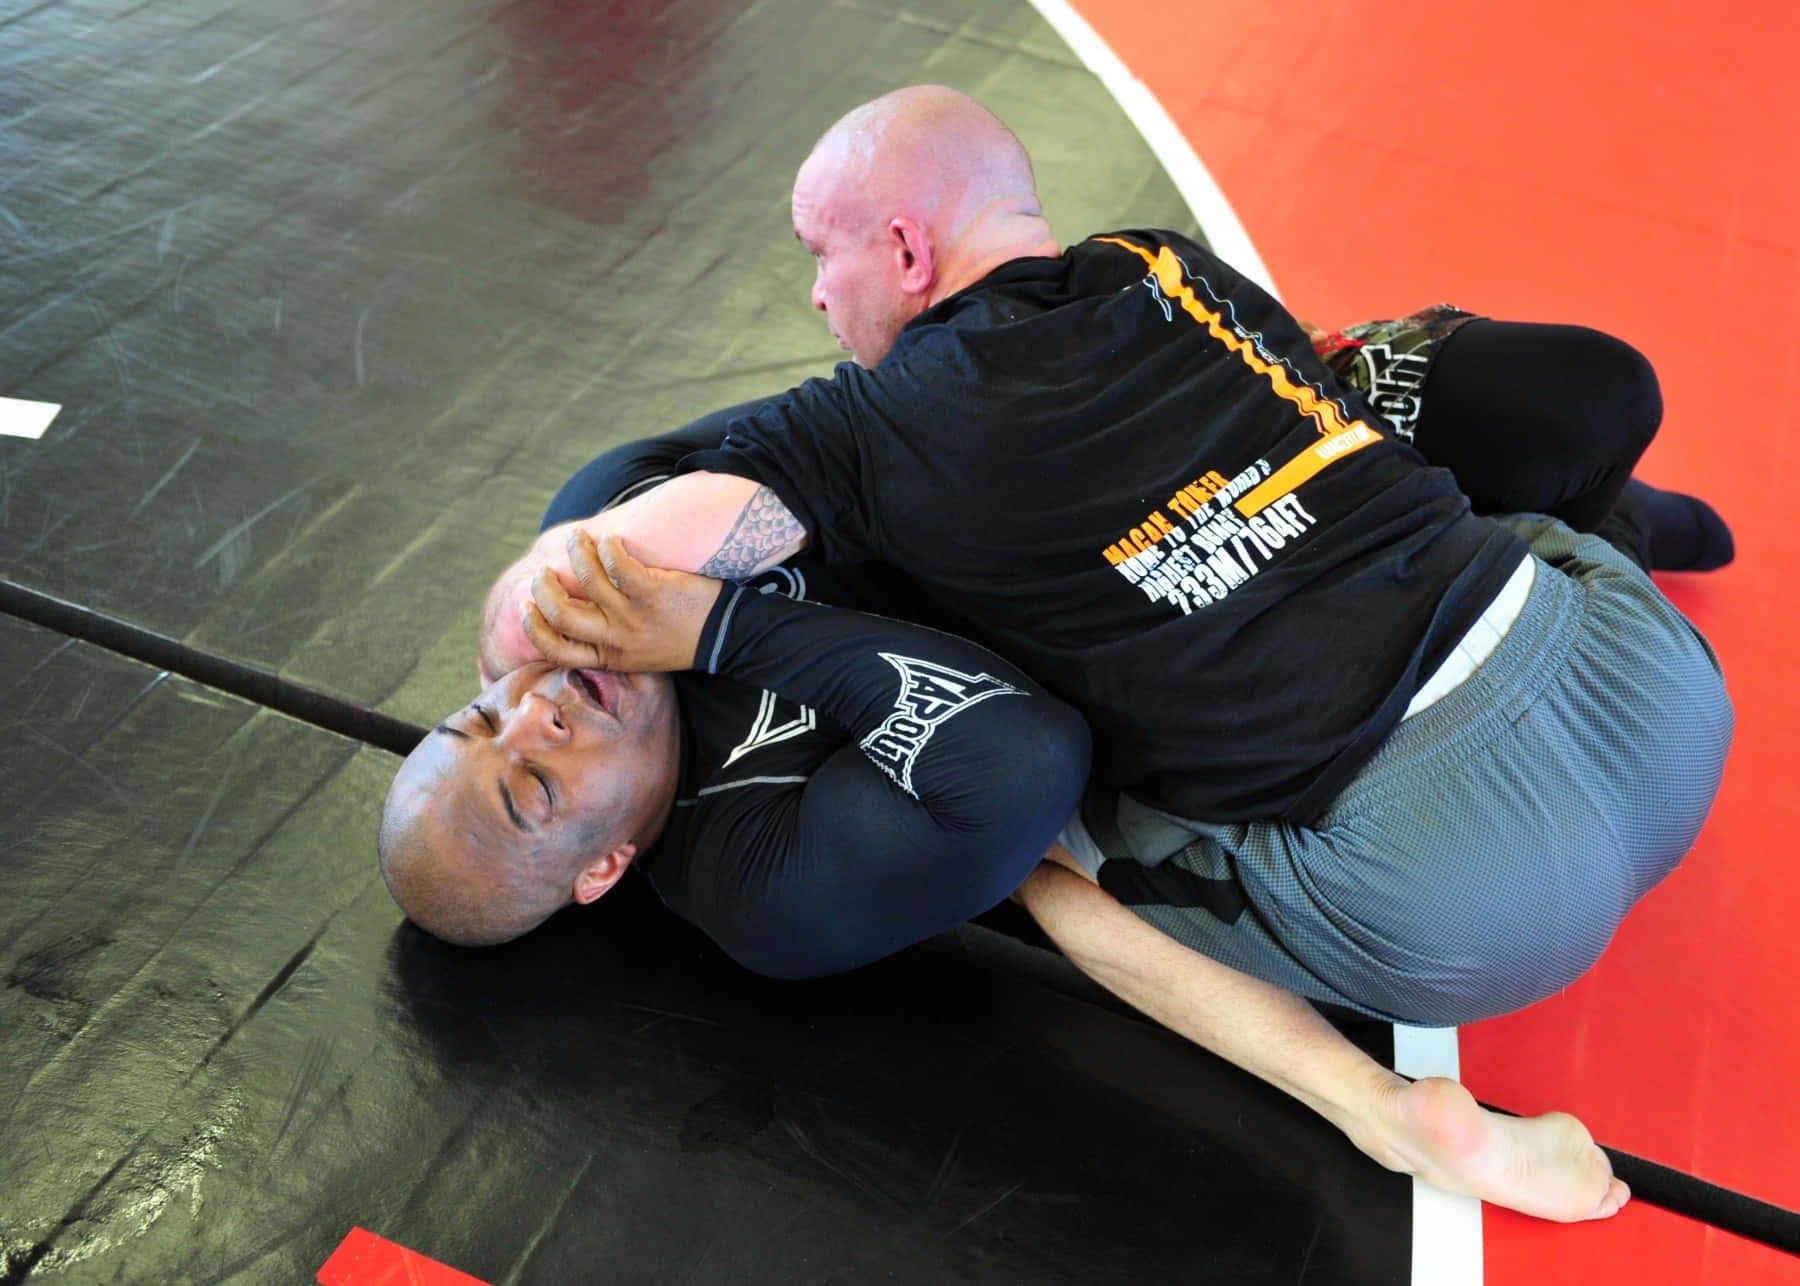 Chris Lytle, open mat session in American Mixed Martial Arts Wallpaper